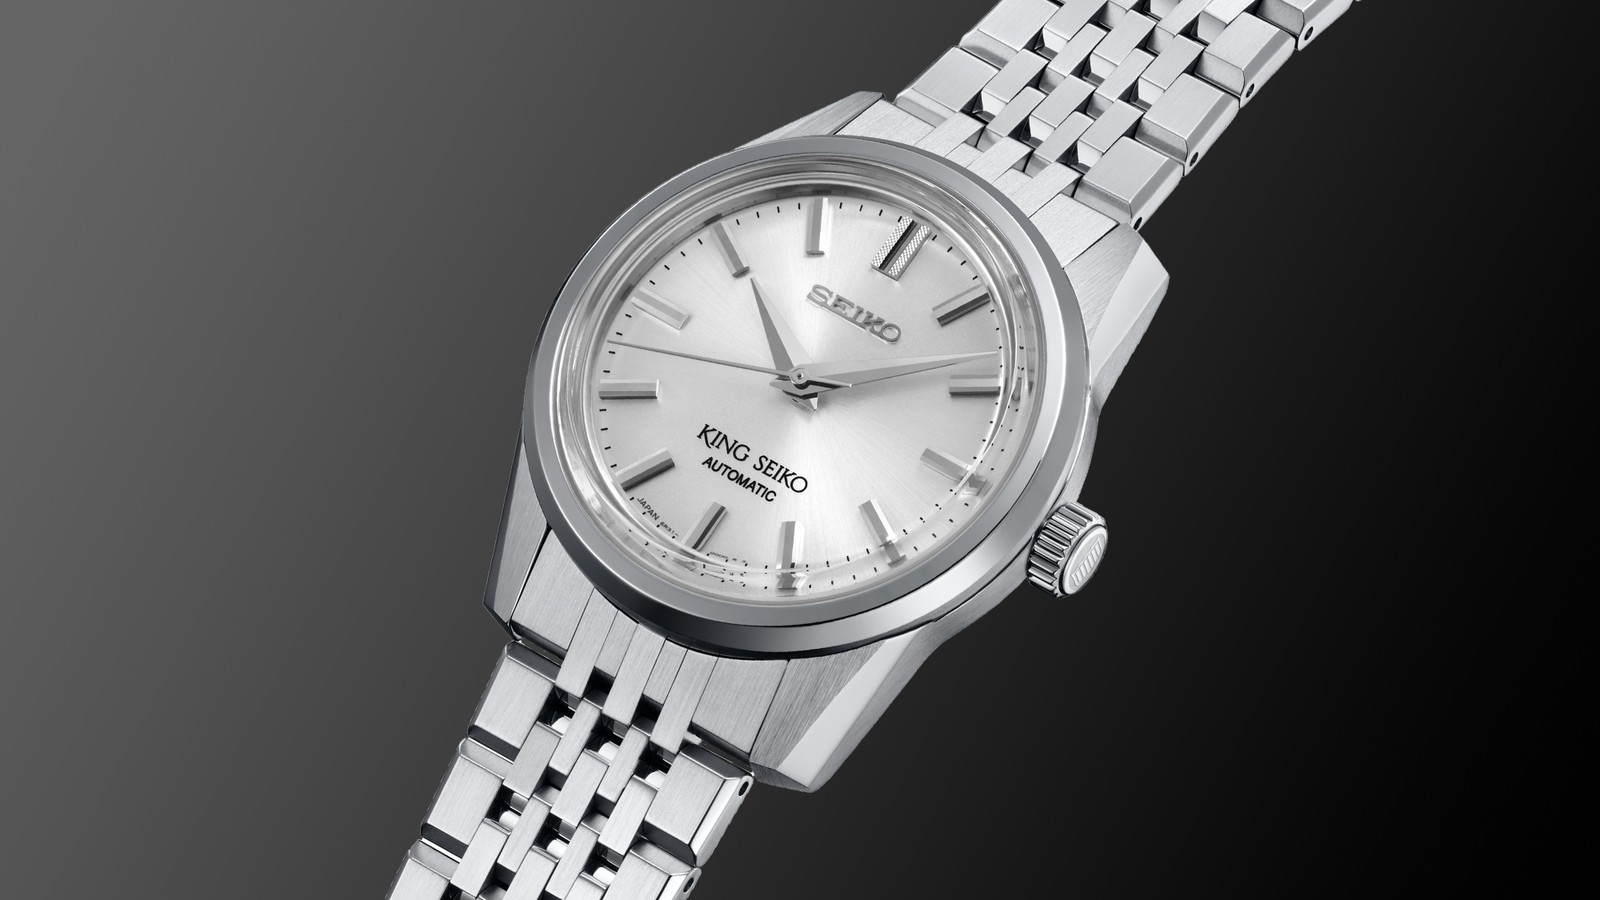 The King's Gambit: Seiko Expands The King Seiko Line With Five New Models |  Two Broke Watch Snobs